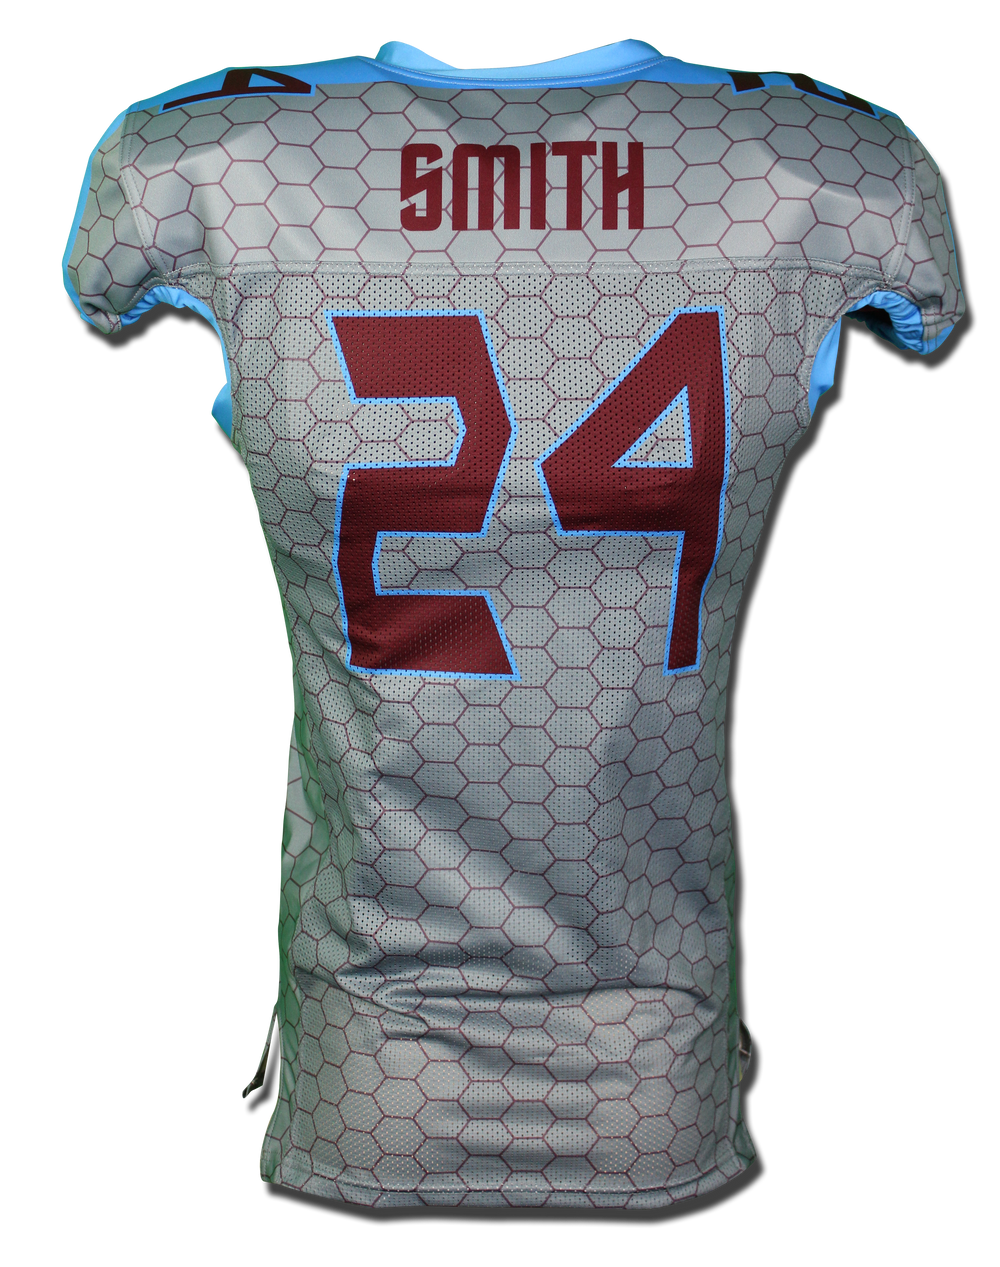 All-Pro Traditional Football Jersey